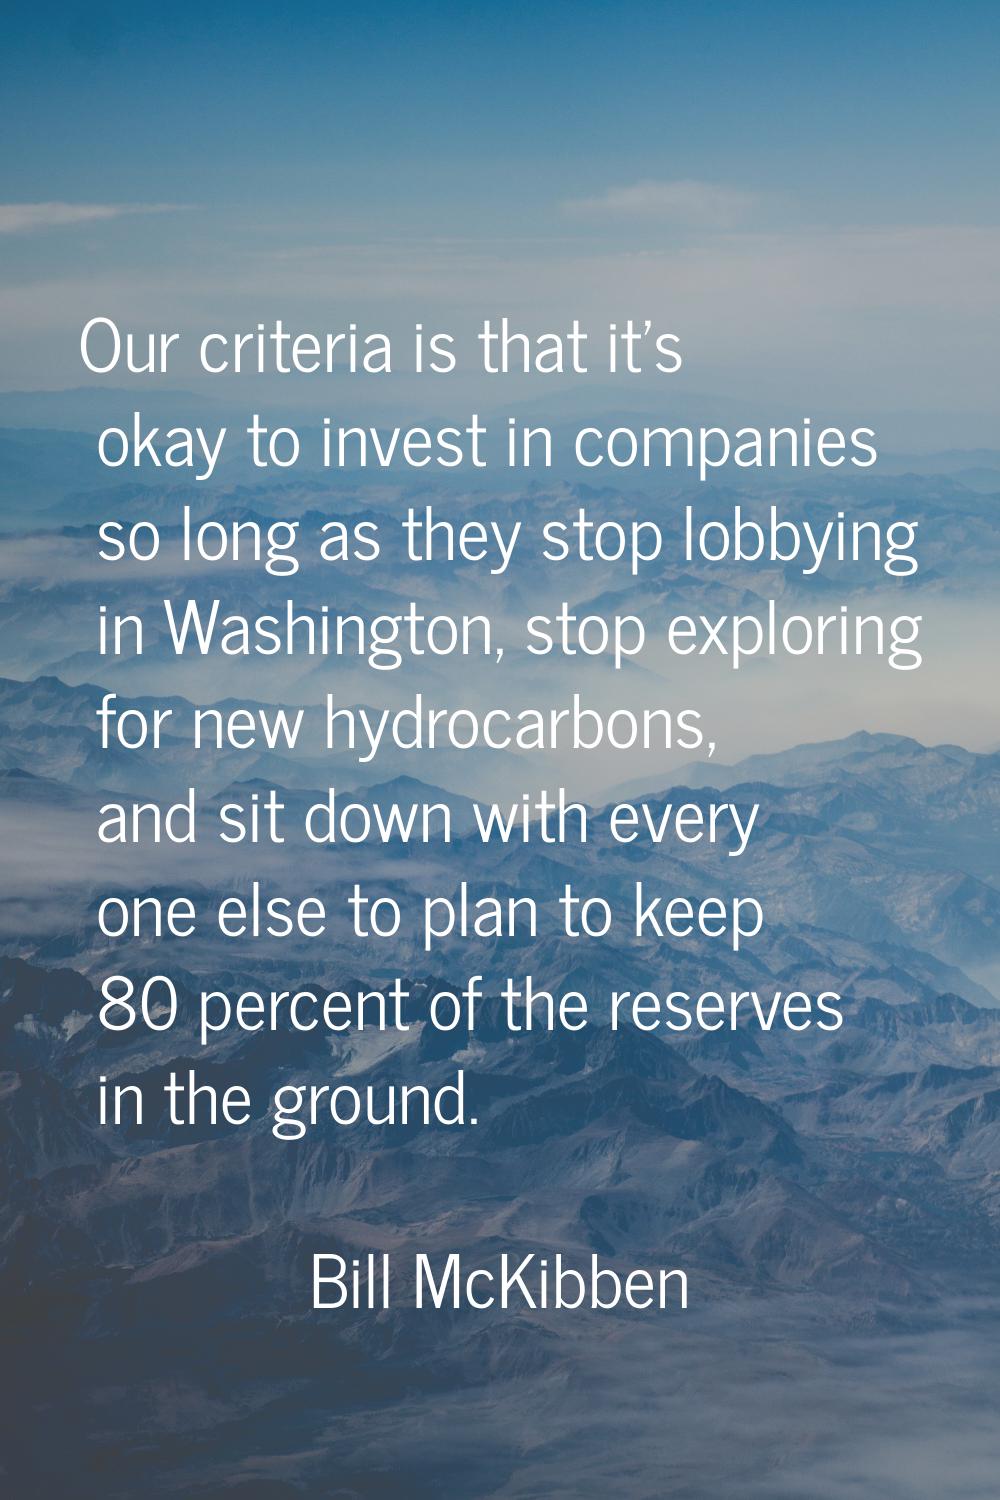 Our criteria is that it's okay to invest in companies so long as they stop lobbying in Washington, 